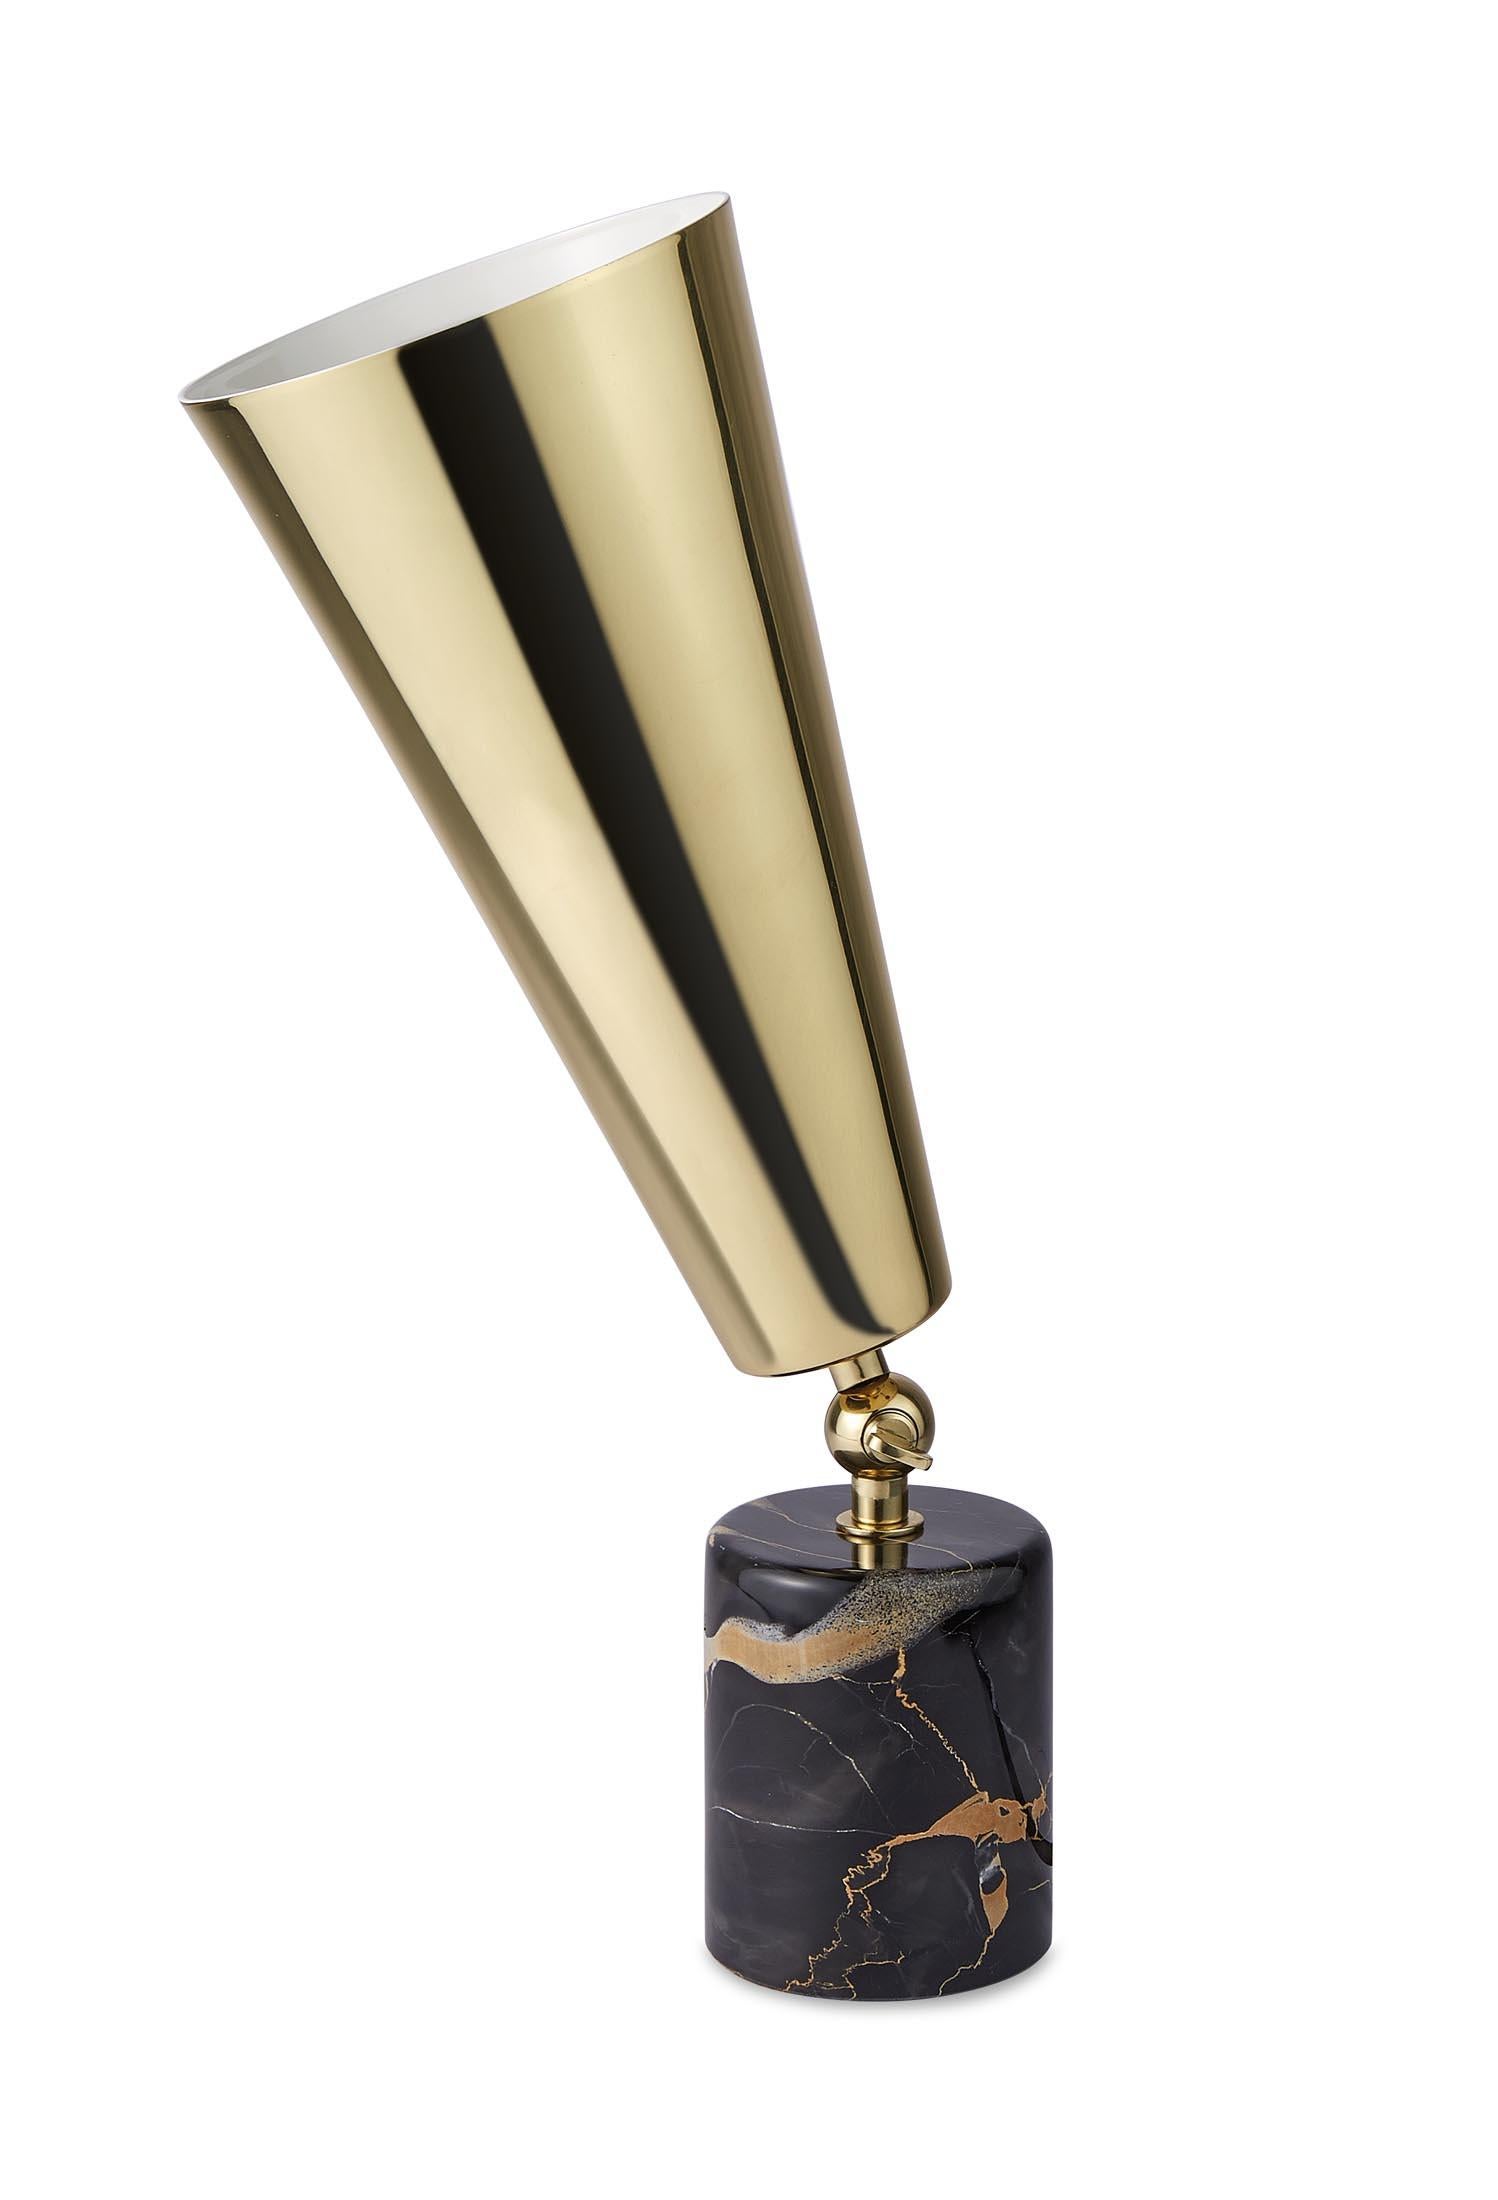 Tato Italia 'Vox' Table Lamp in Portoro Marble and Brass. Designed by Lorenza Bozzoli in 2016.

Price is per item. Available to order in unlimited quantities. Available in 15.7